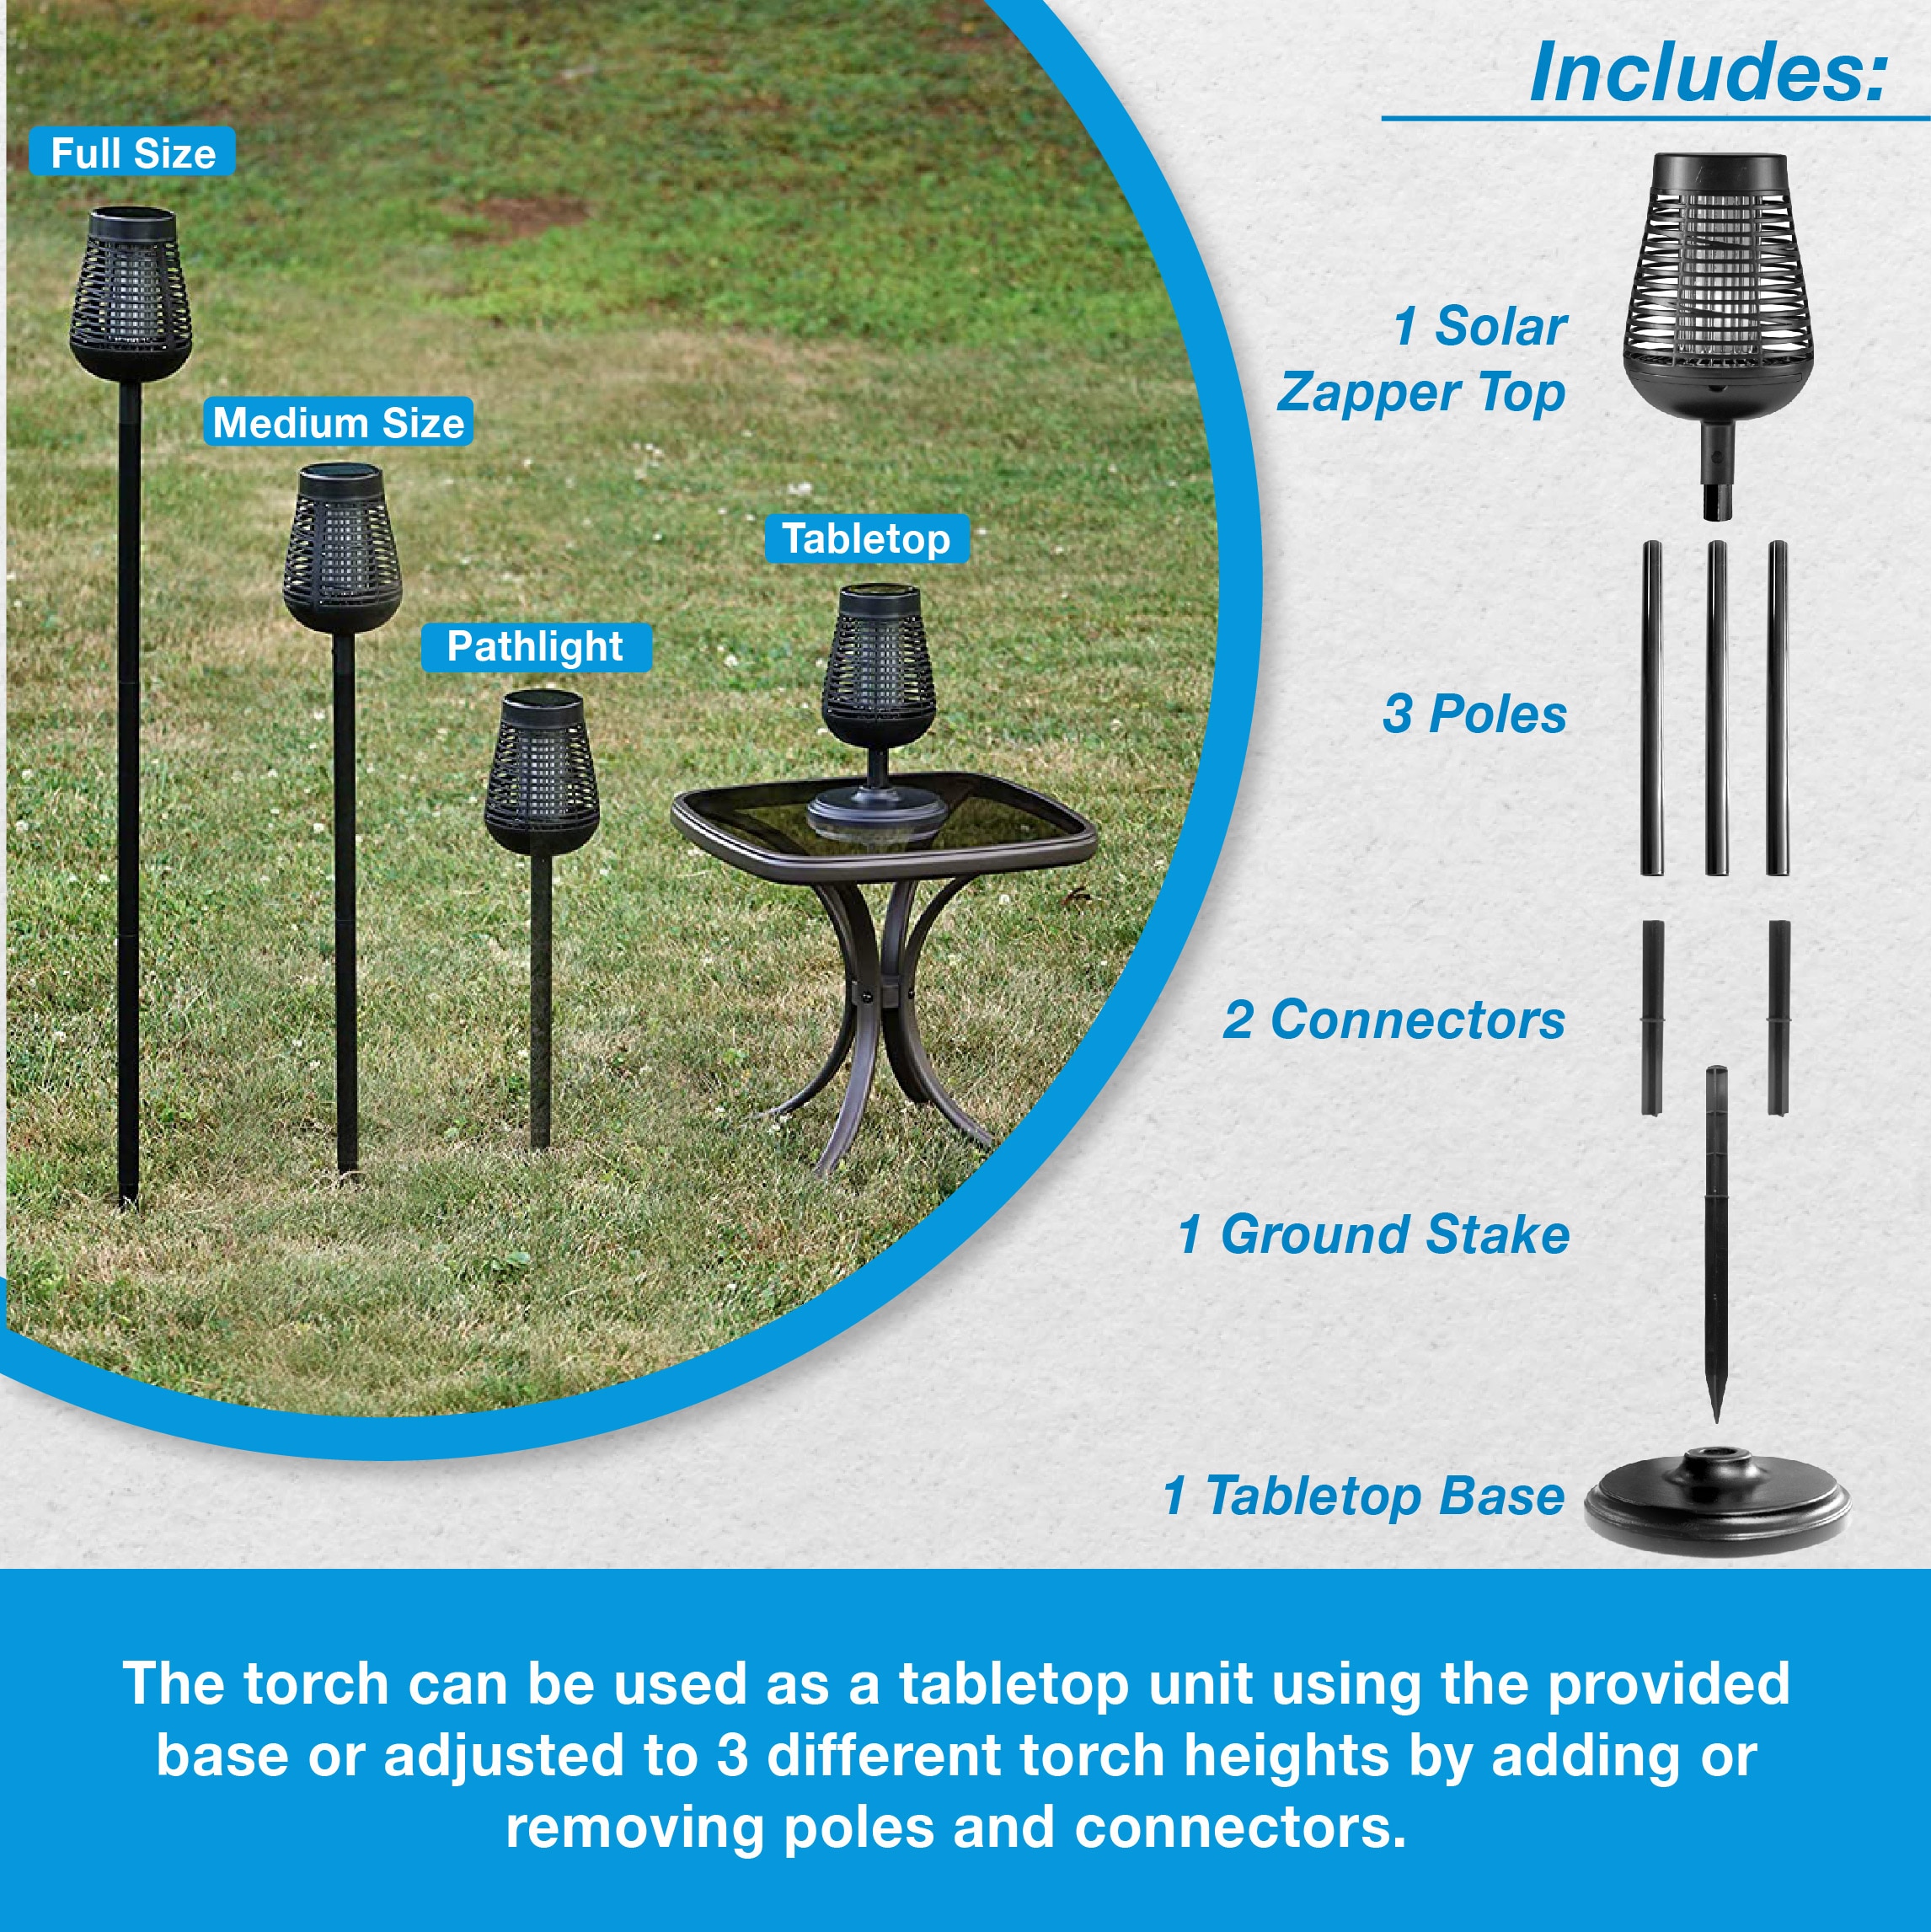 Outdoor Solar Powered Insect Mosquito Killer Lamp with Stand